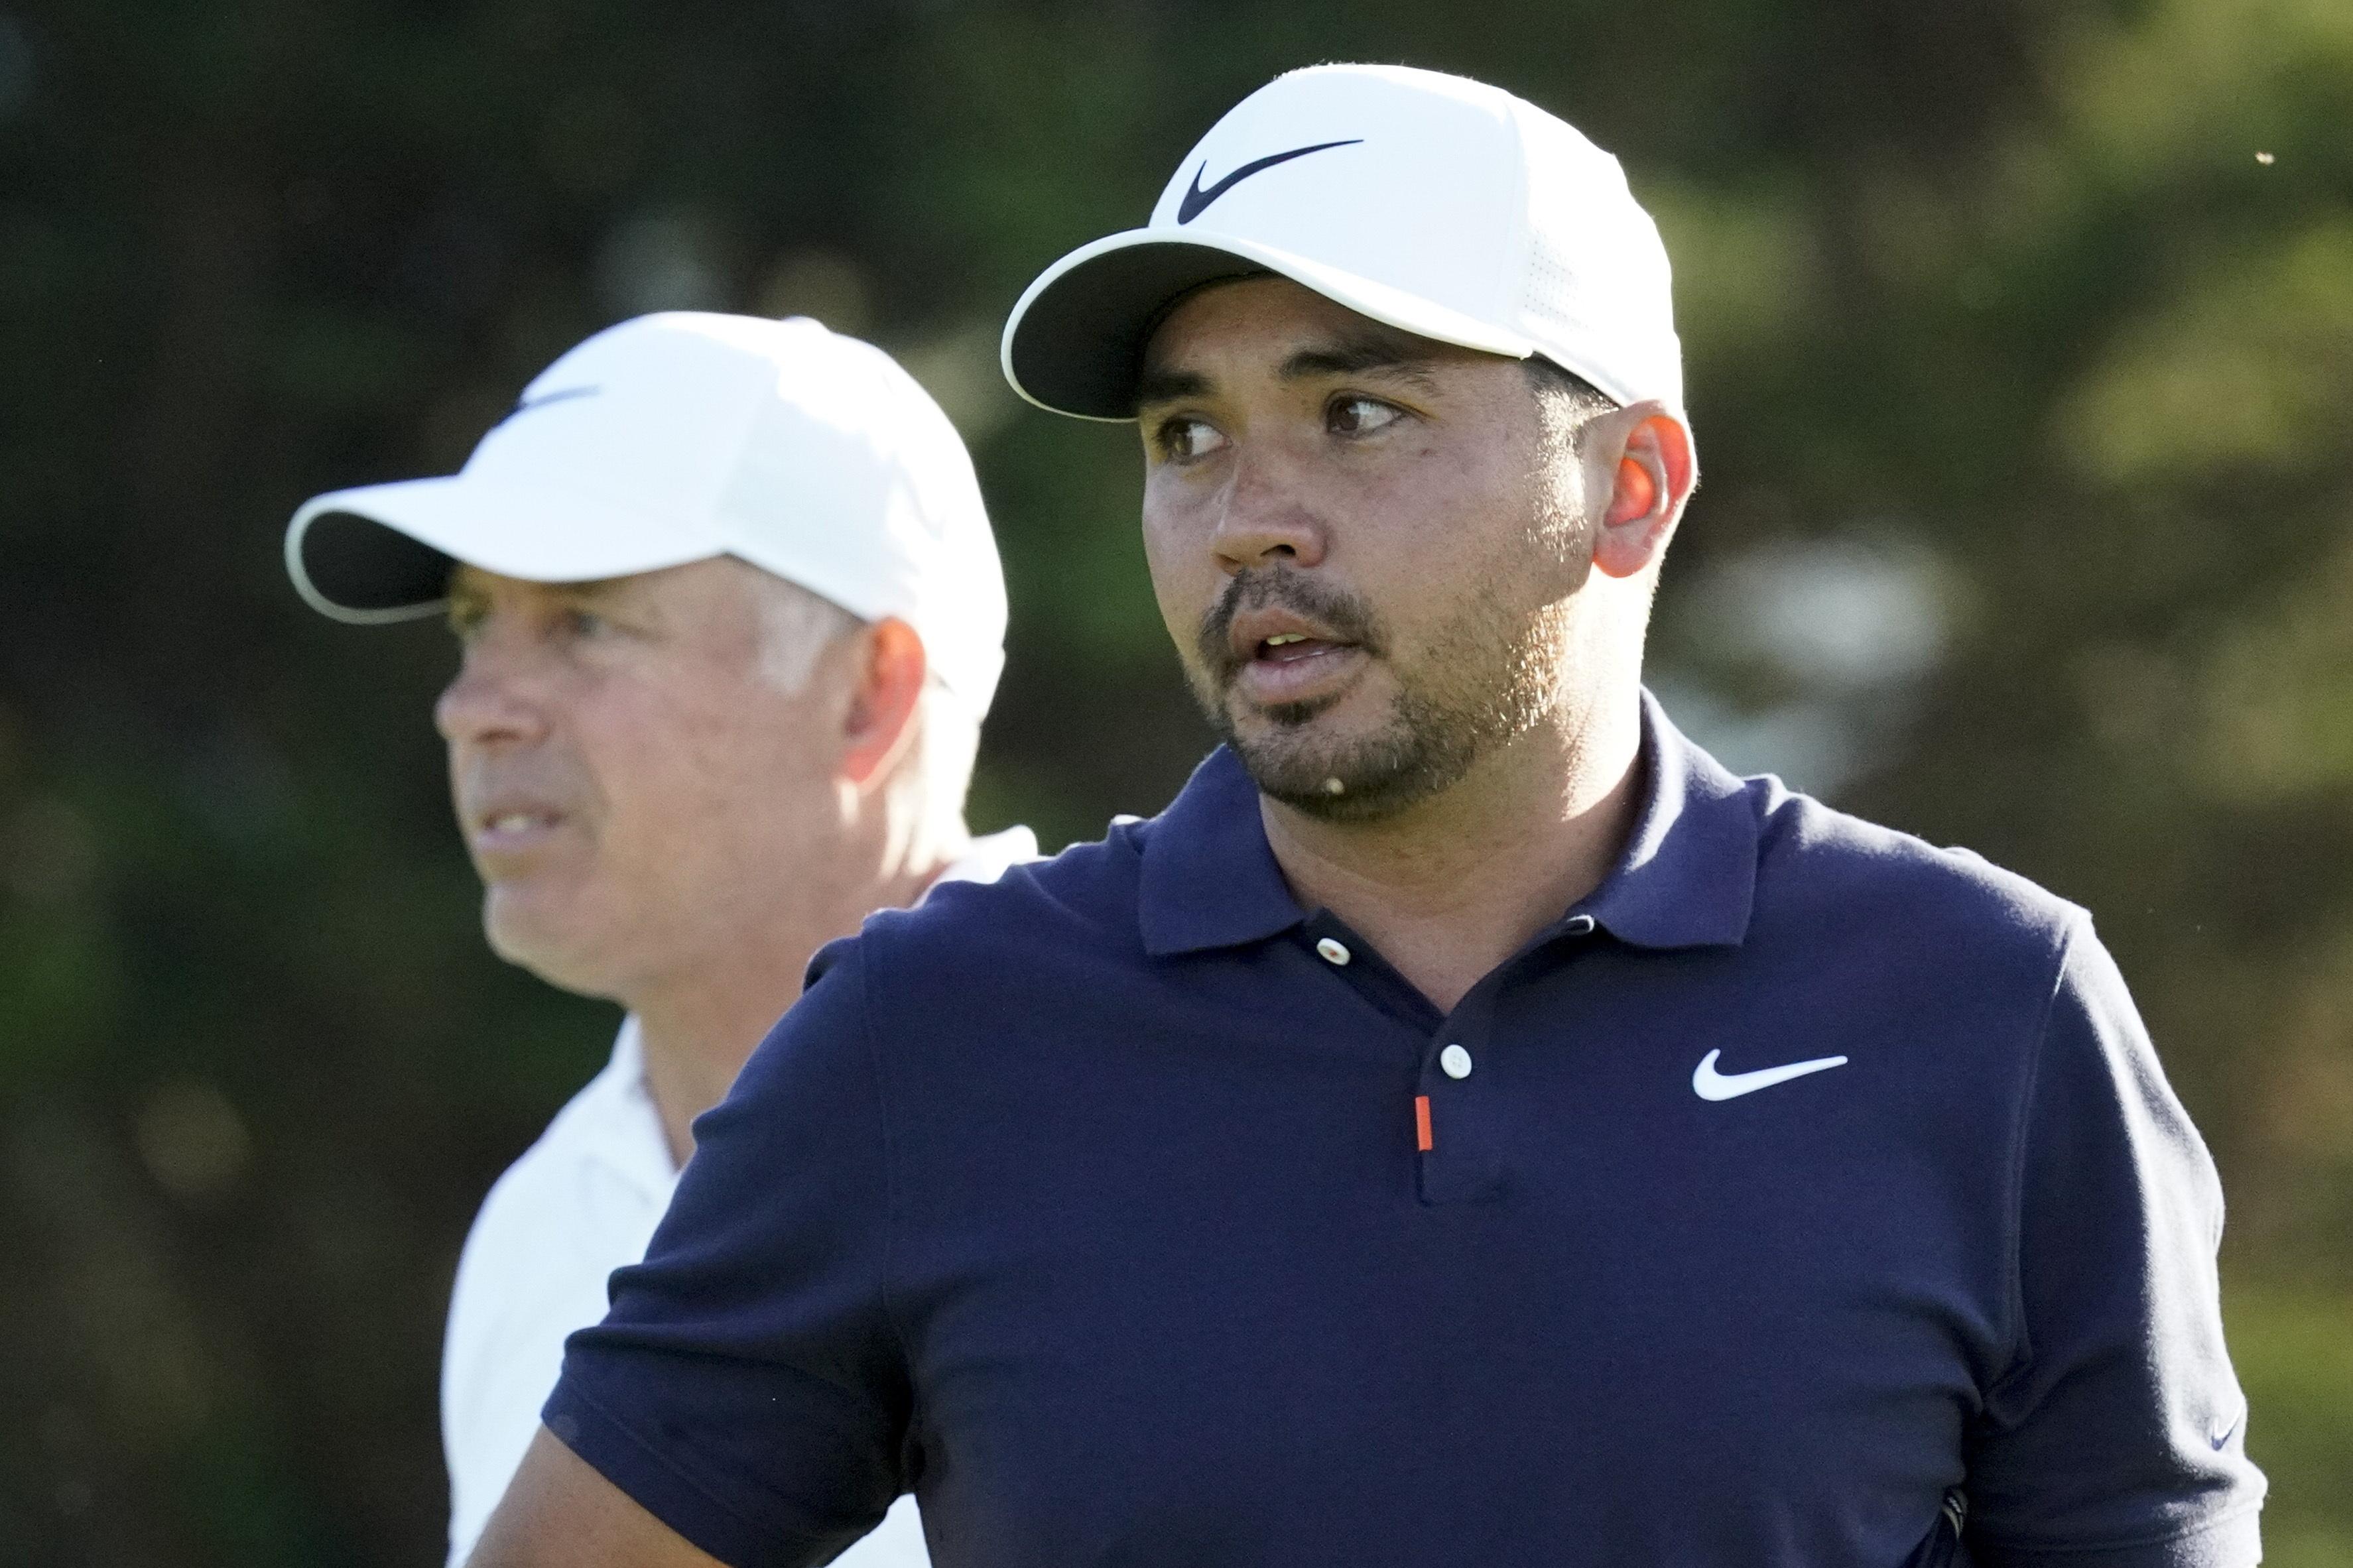 Jason Day ahead of US Open: I've severely underachieved